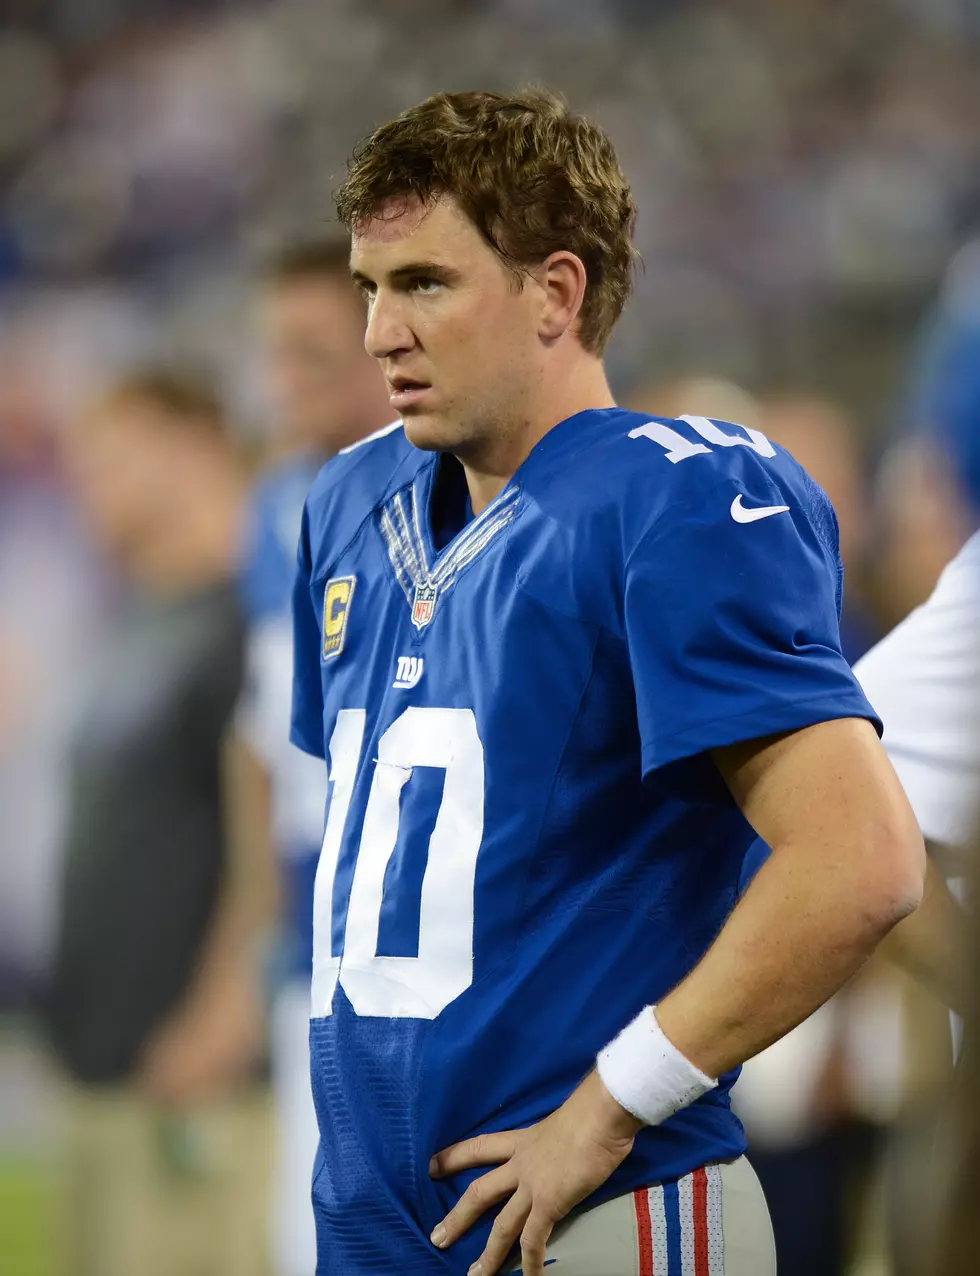 Should We Be Worried About Eli?